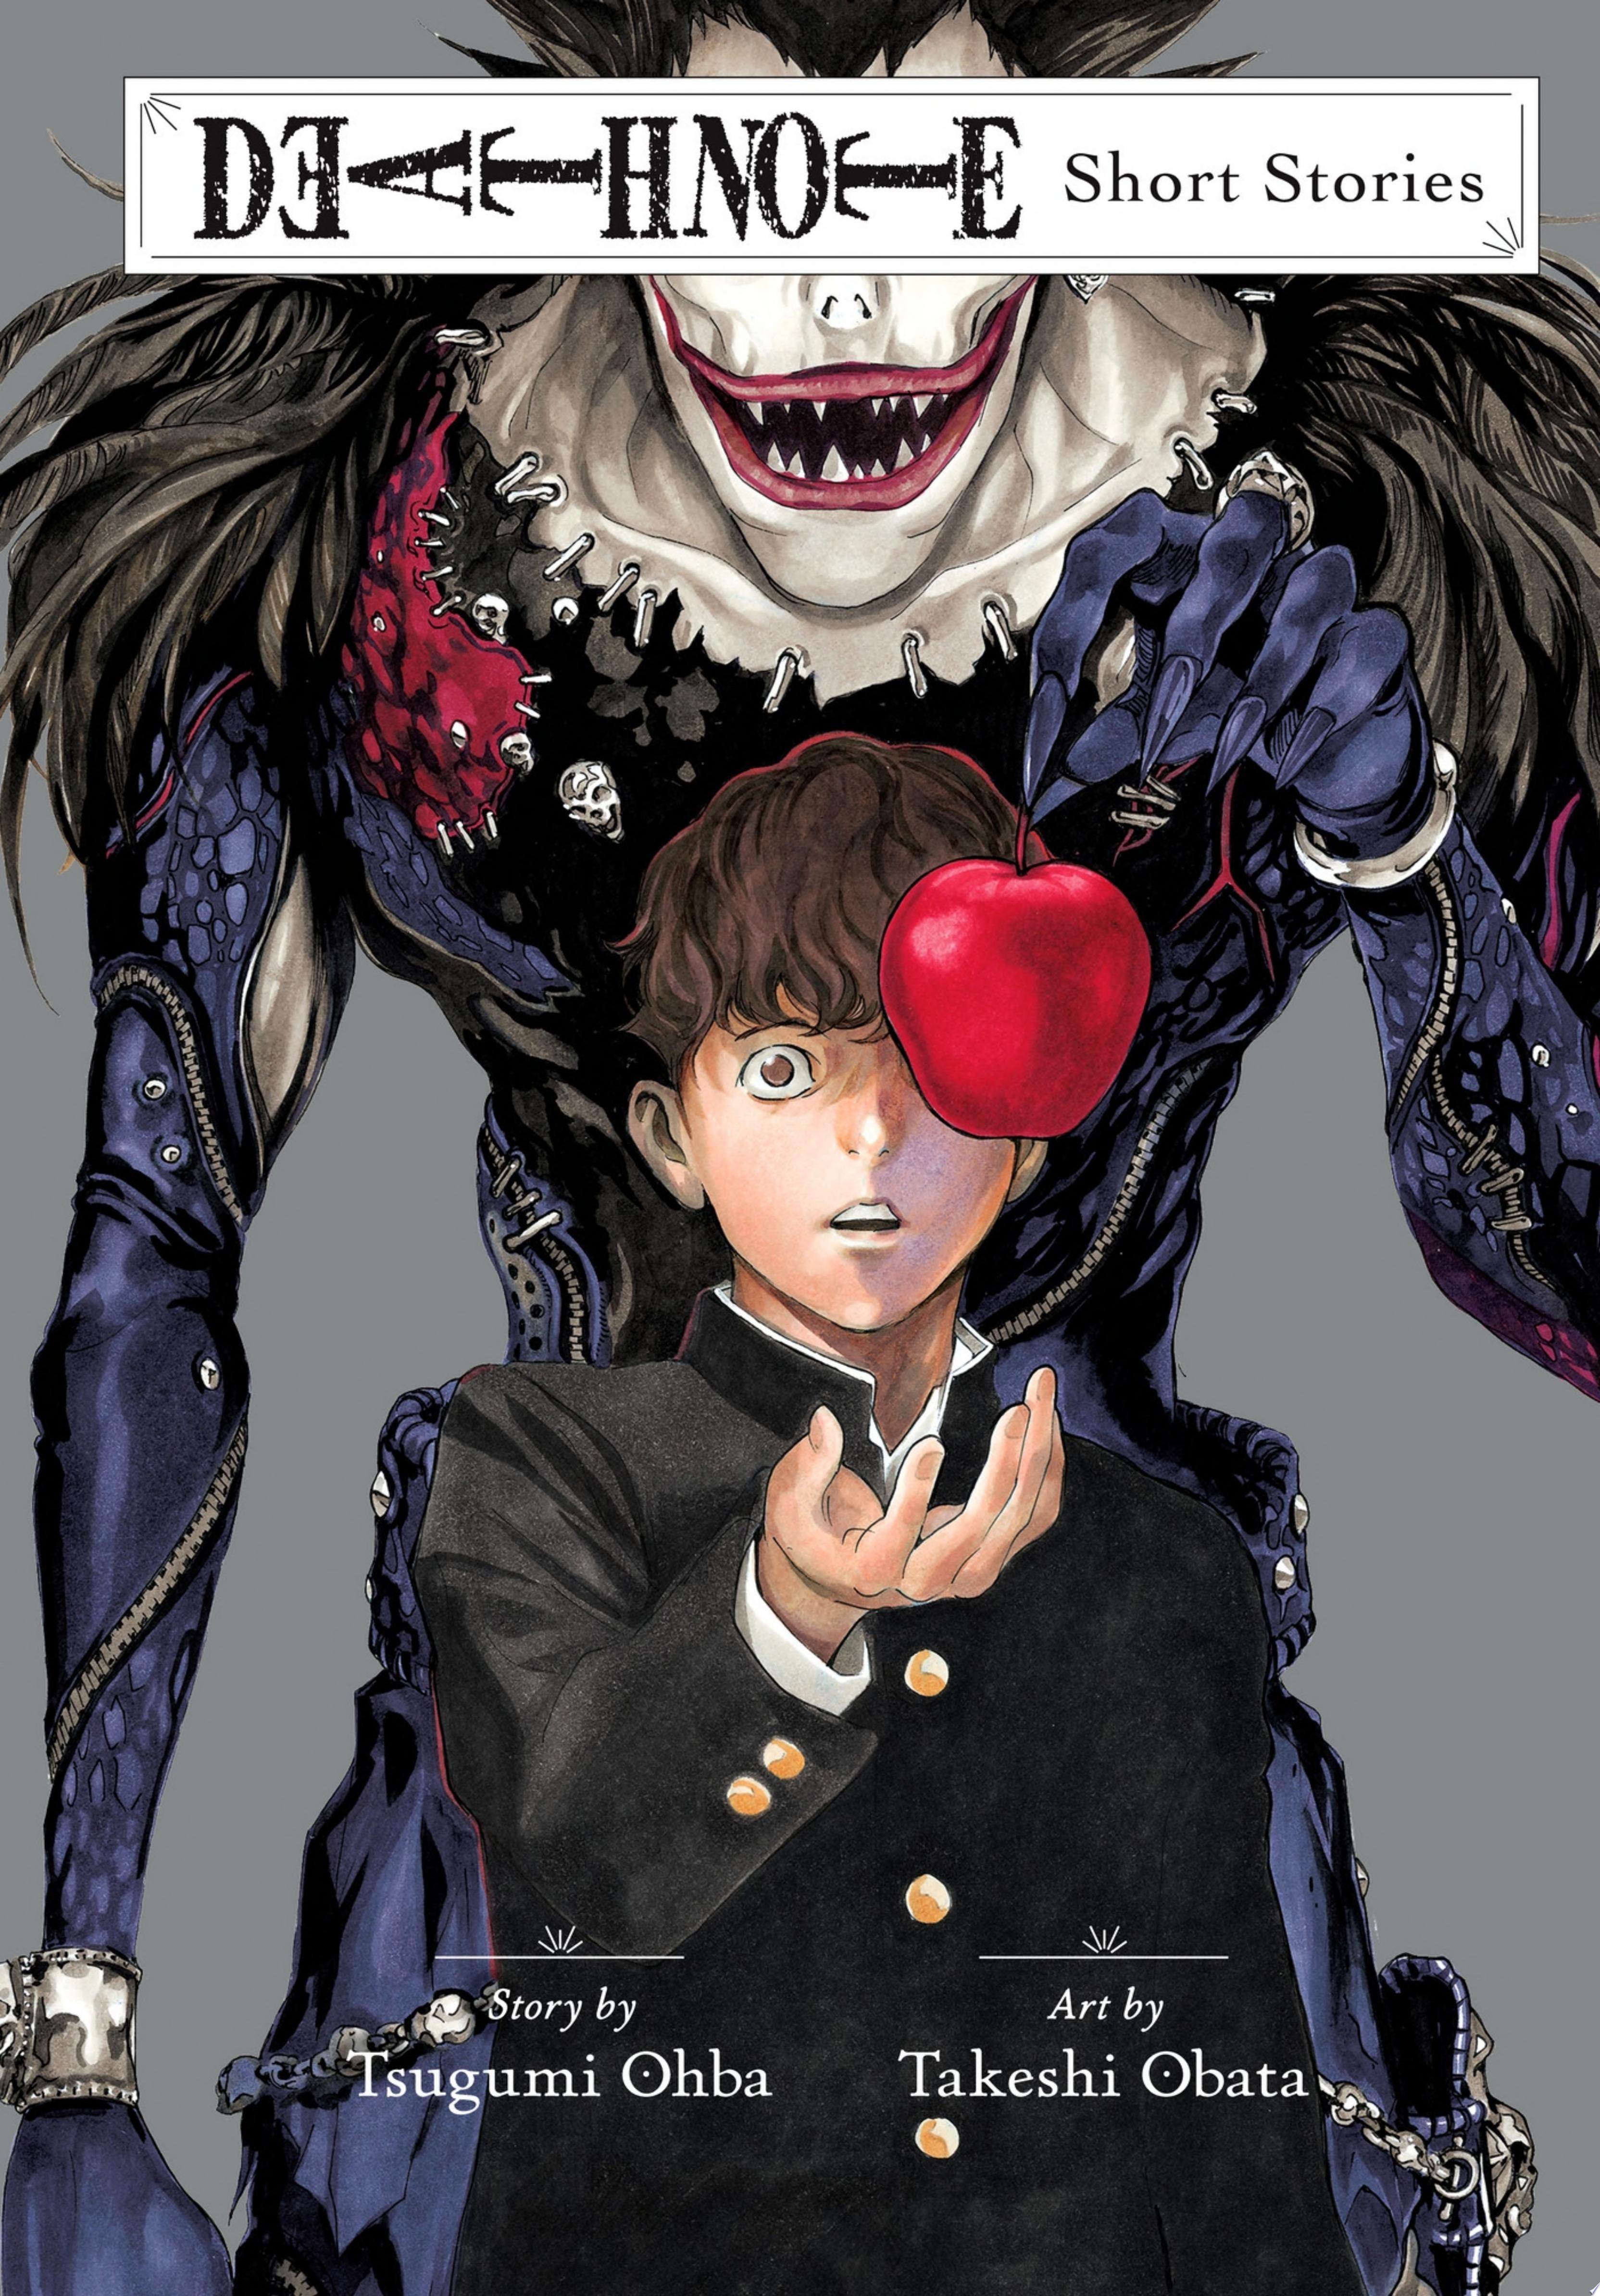 Image for "Death Note Short Stories"